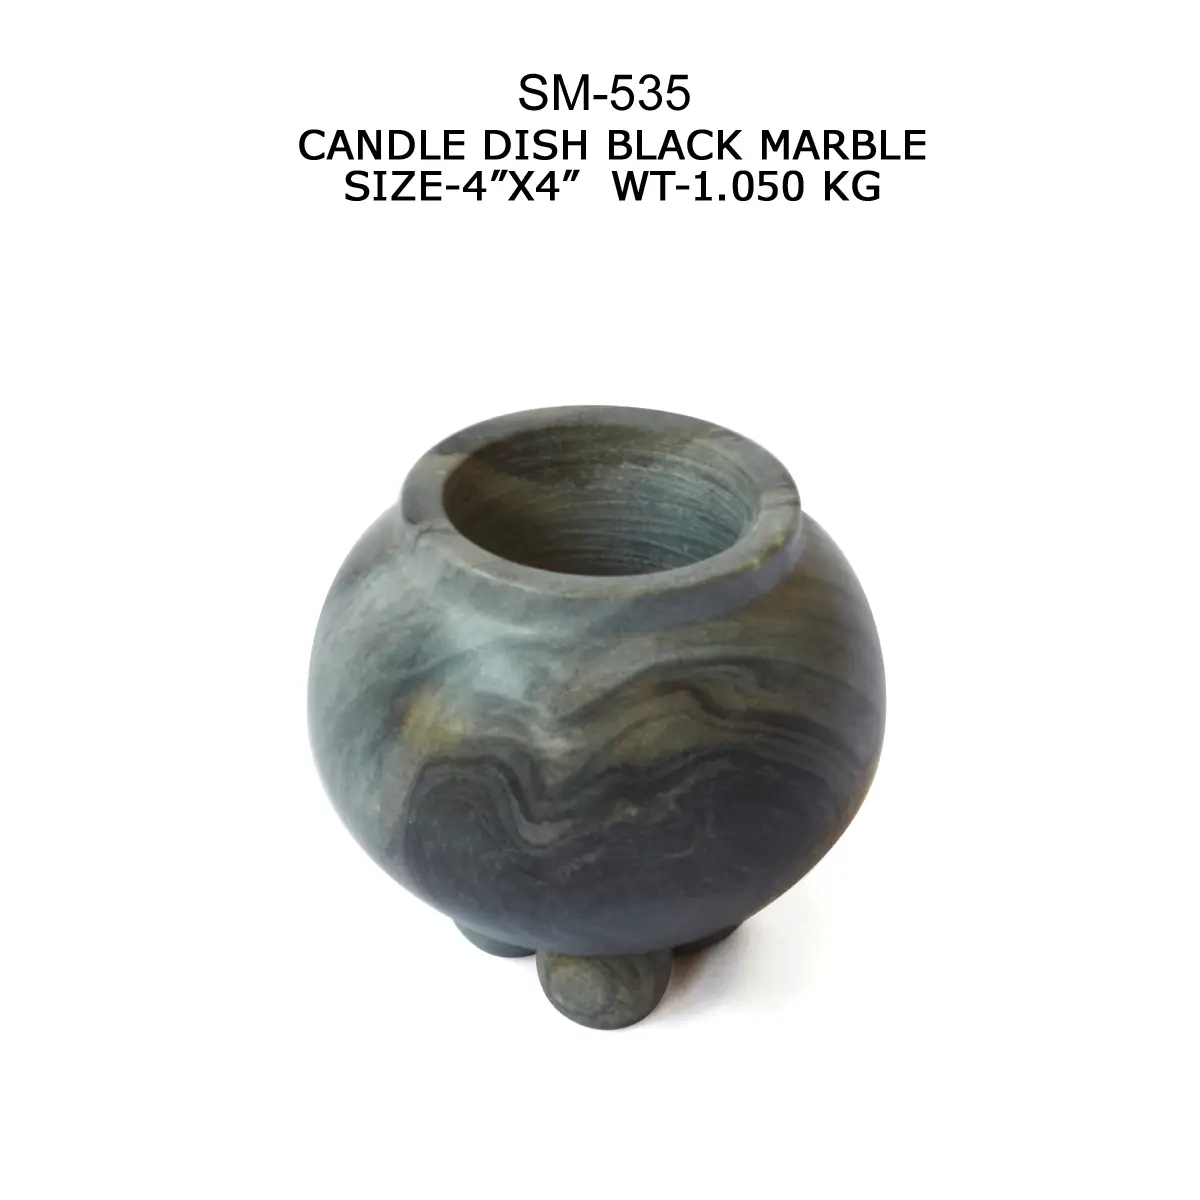 CANDLE DISH BLACK MARBLE